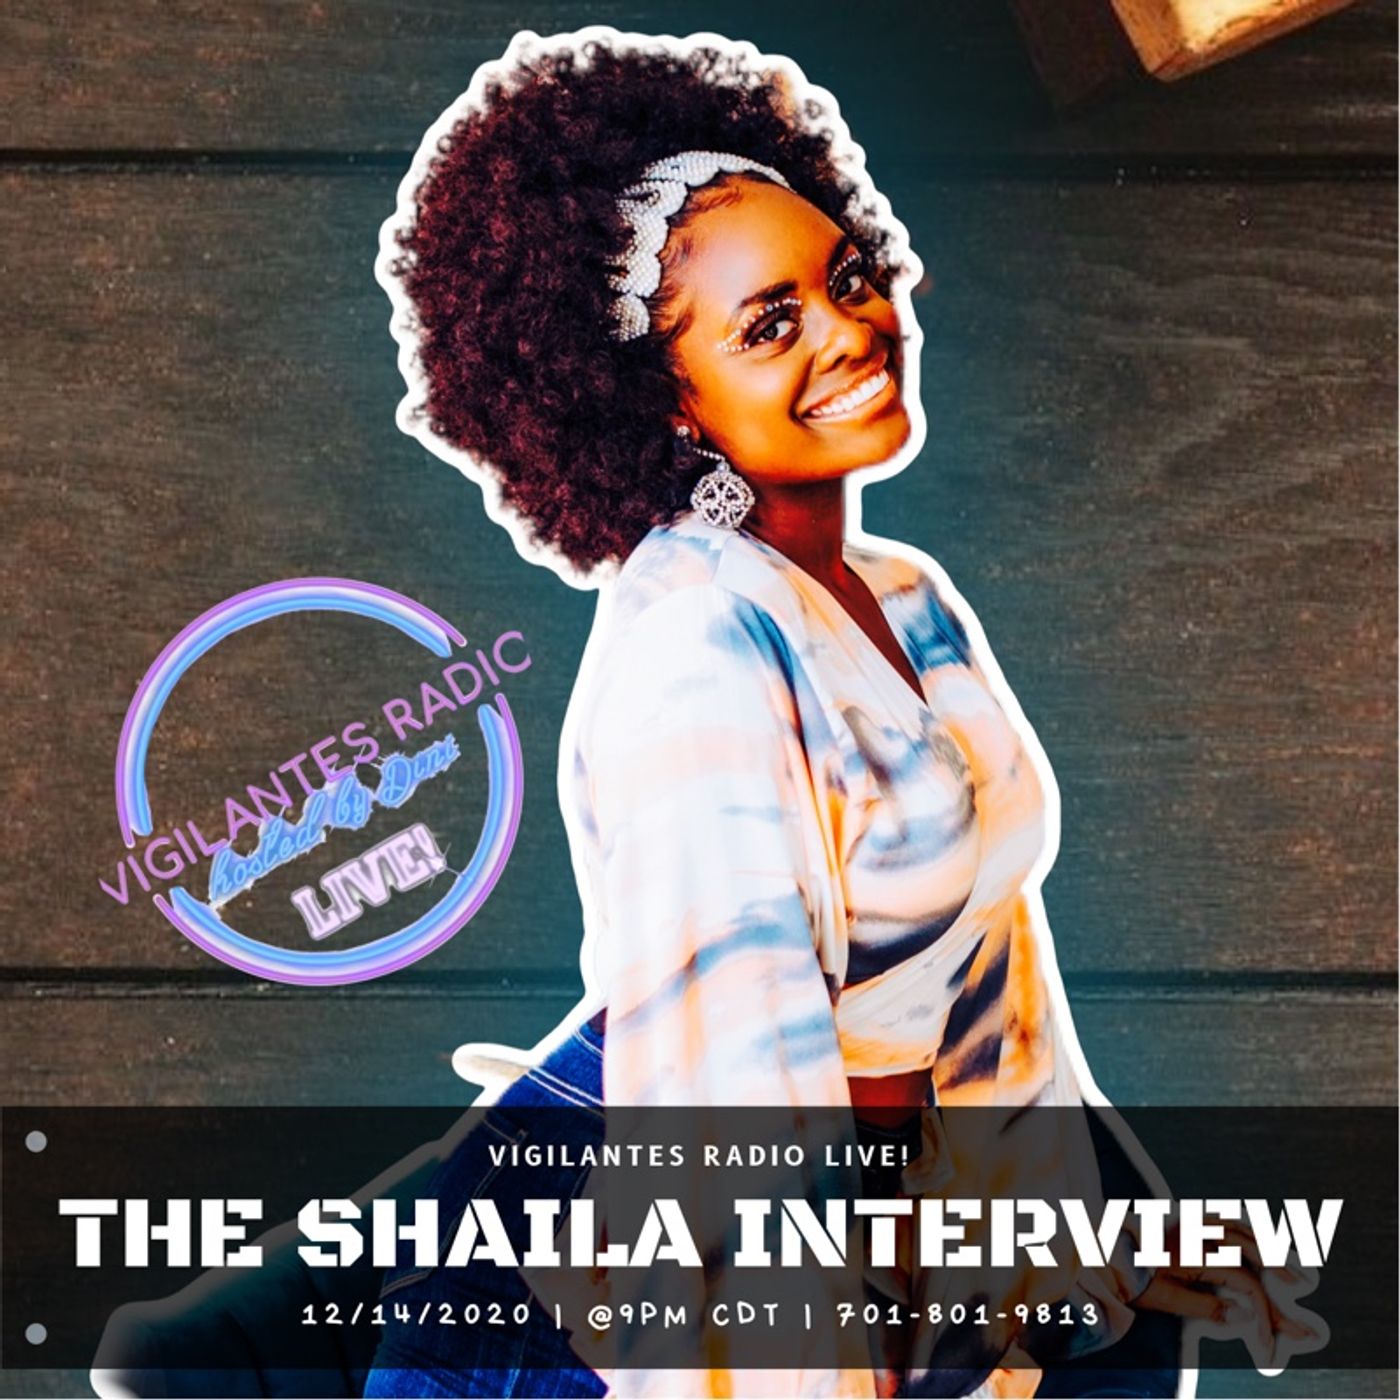 The Shaila Interview. Image